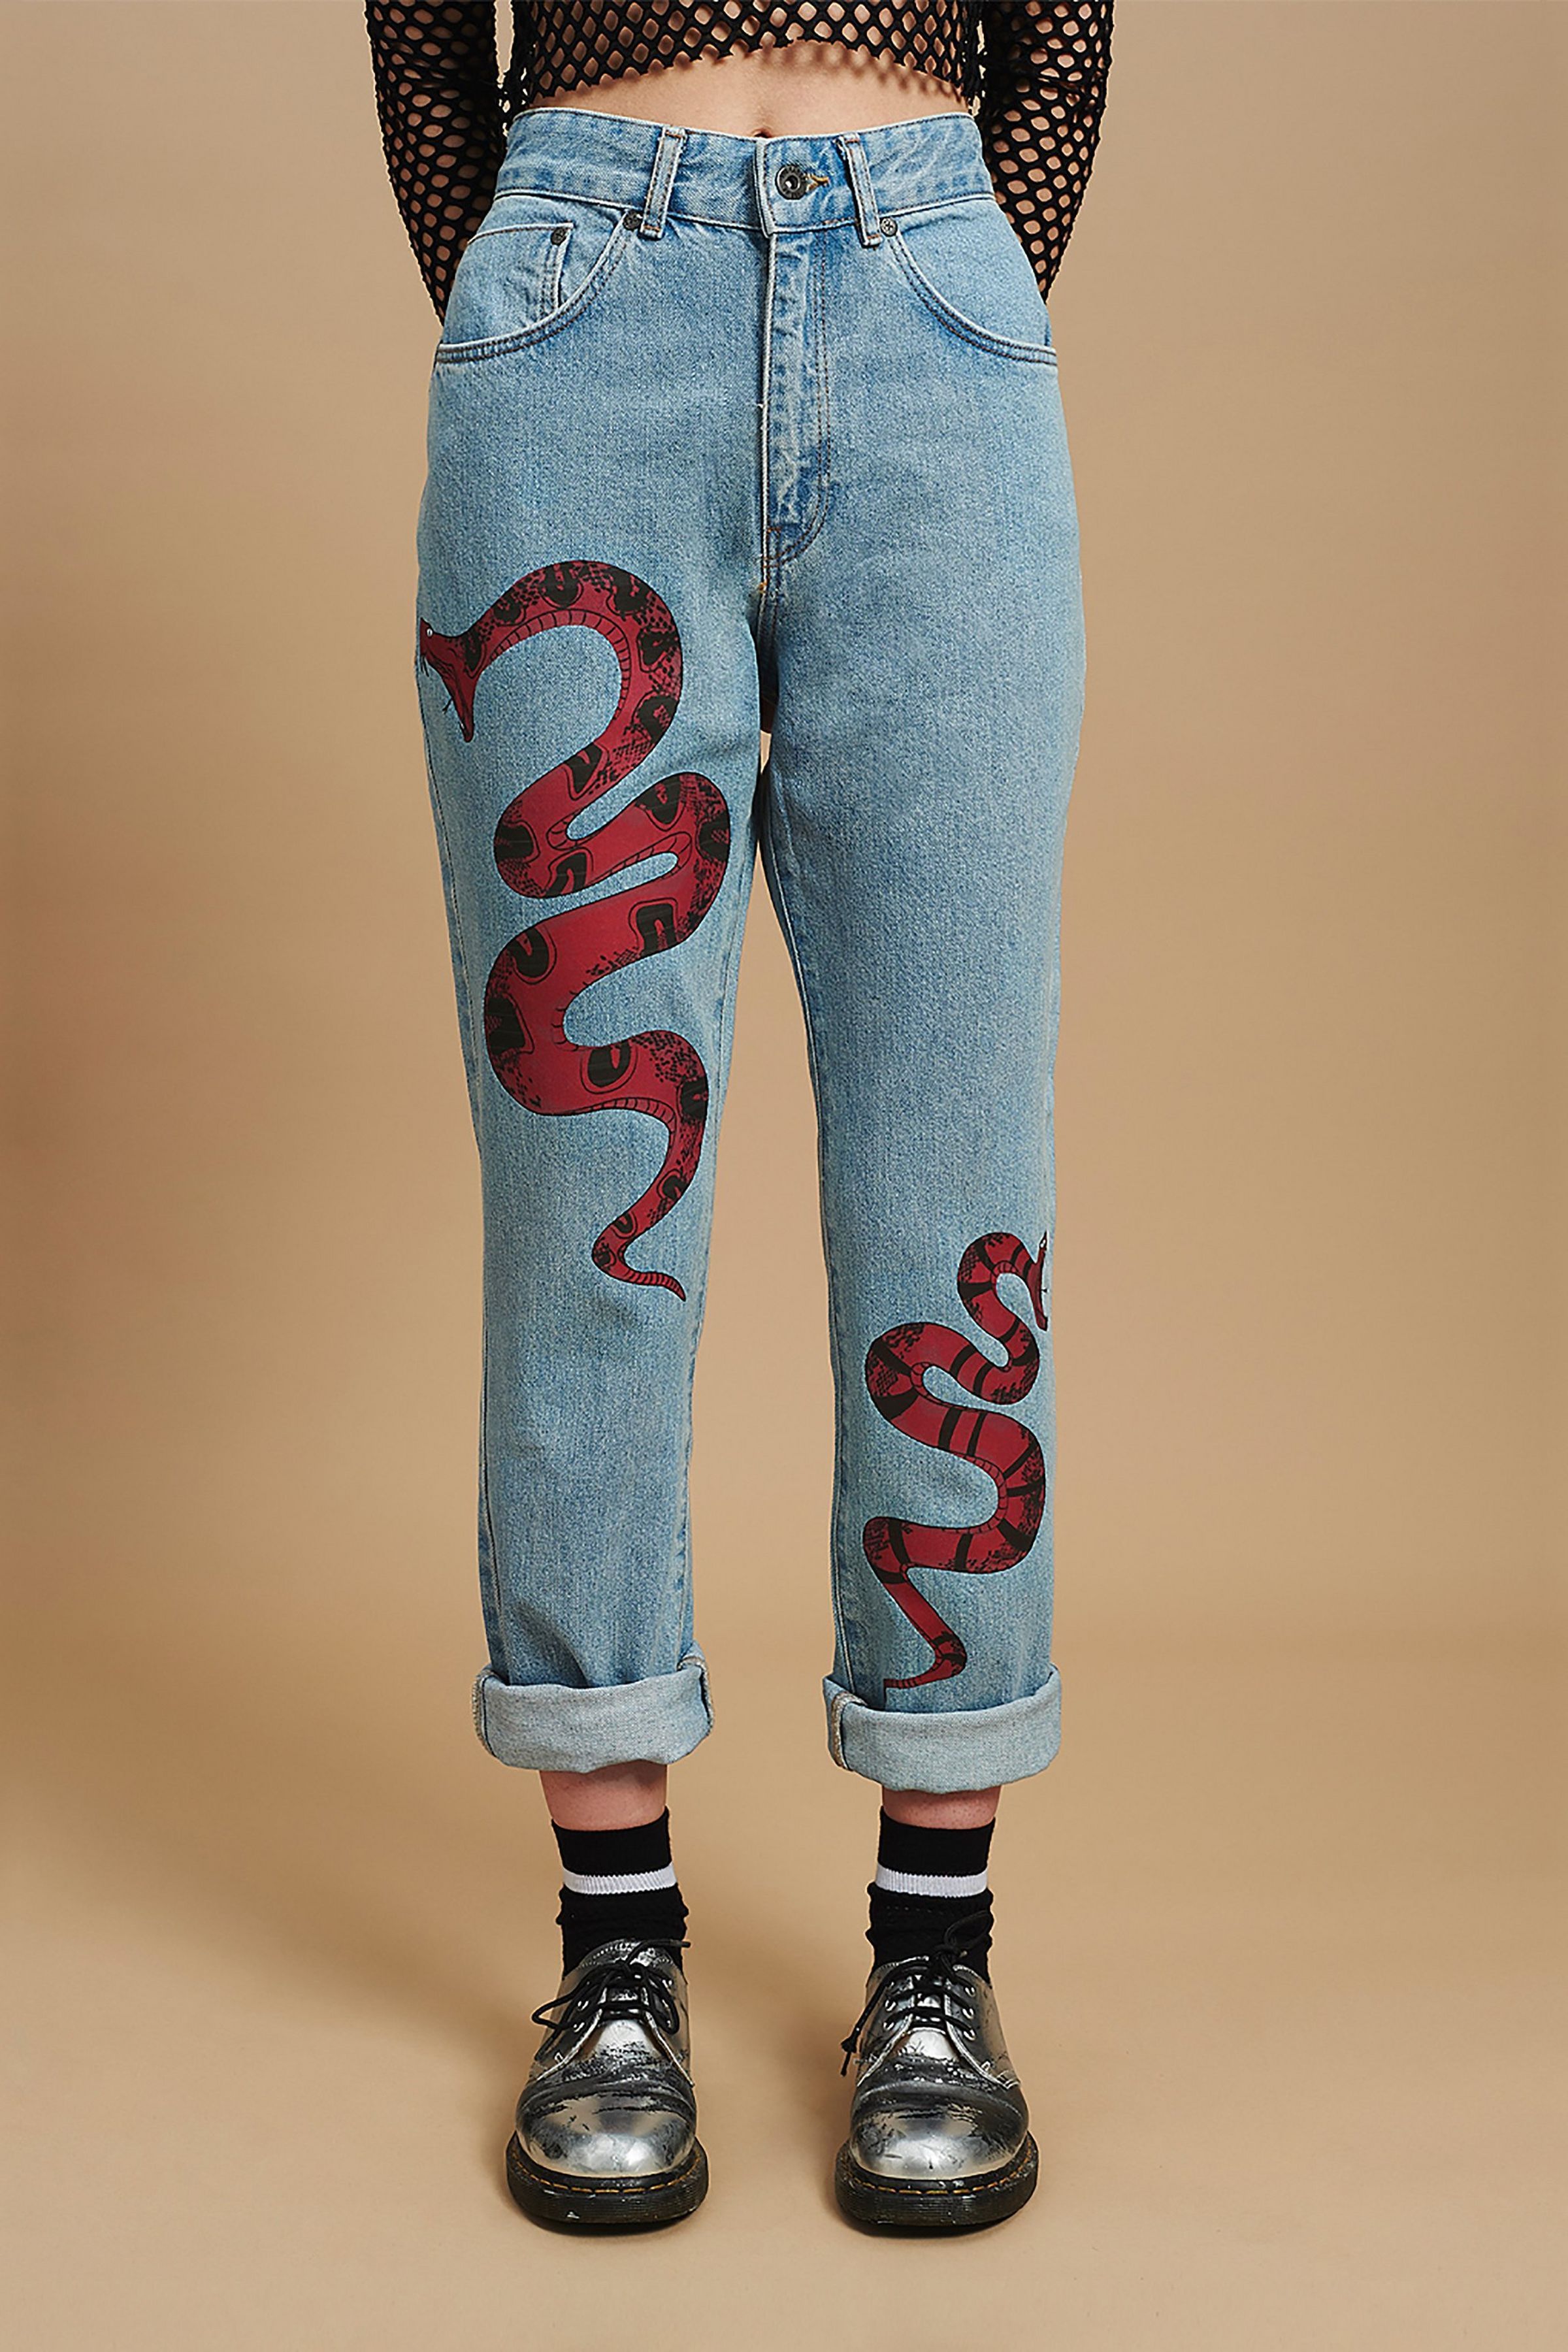 Snake Mom Jeans by The Ragged Priest -   11 DIY Clothes No Sewing grunge ideas